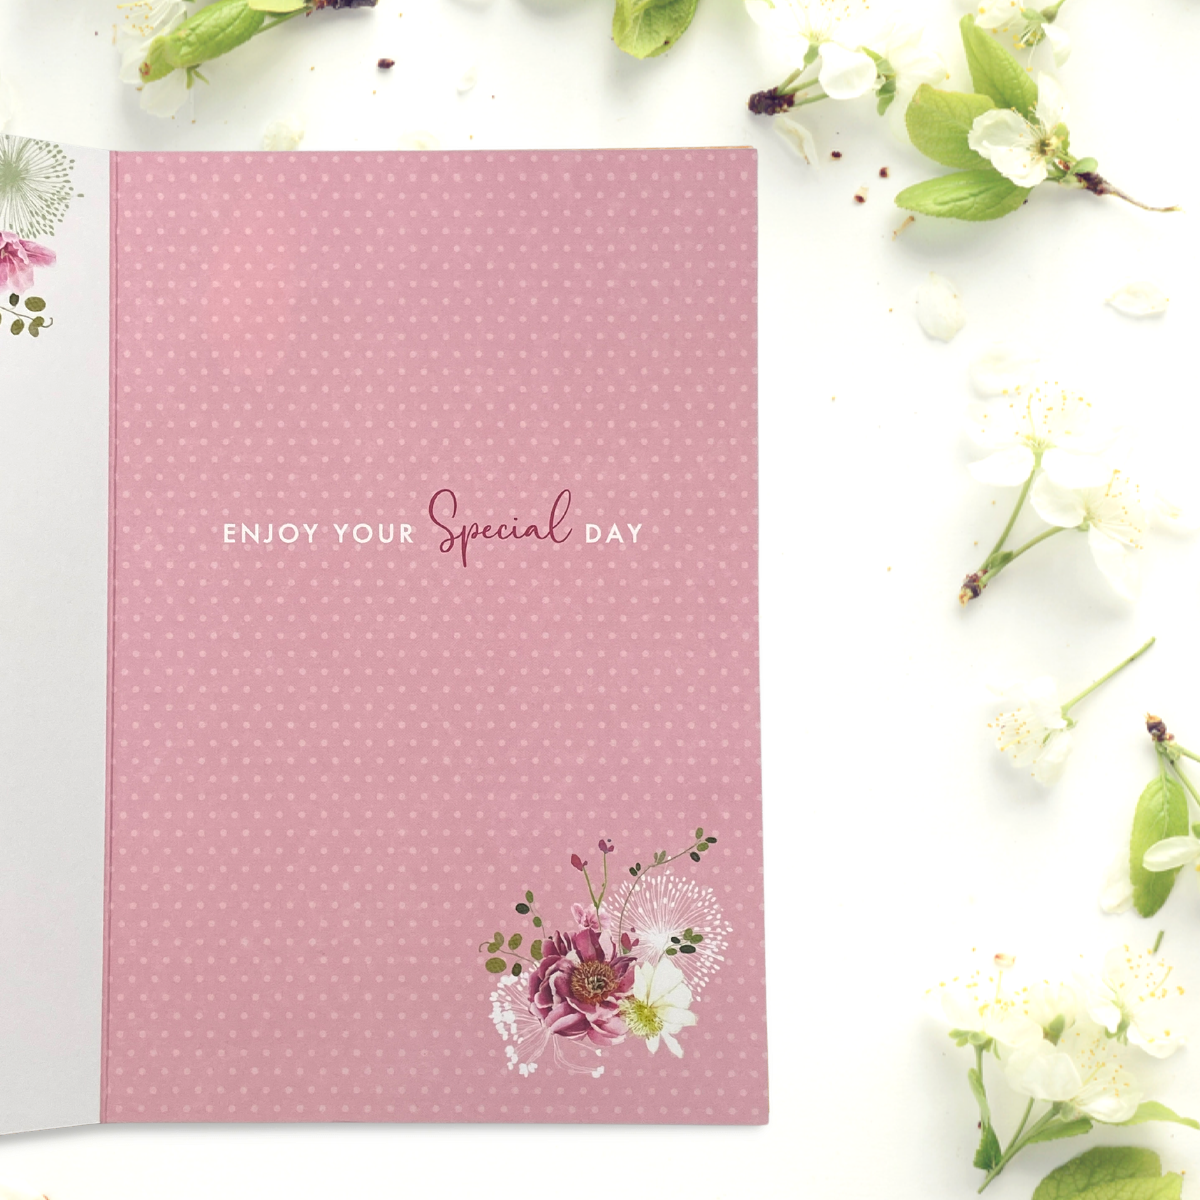 Inside image showing pink background with floral graphics and verse